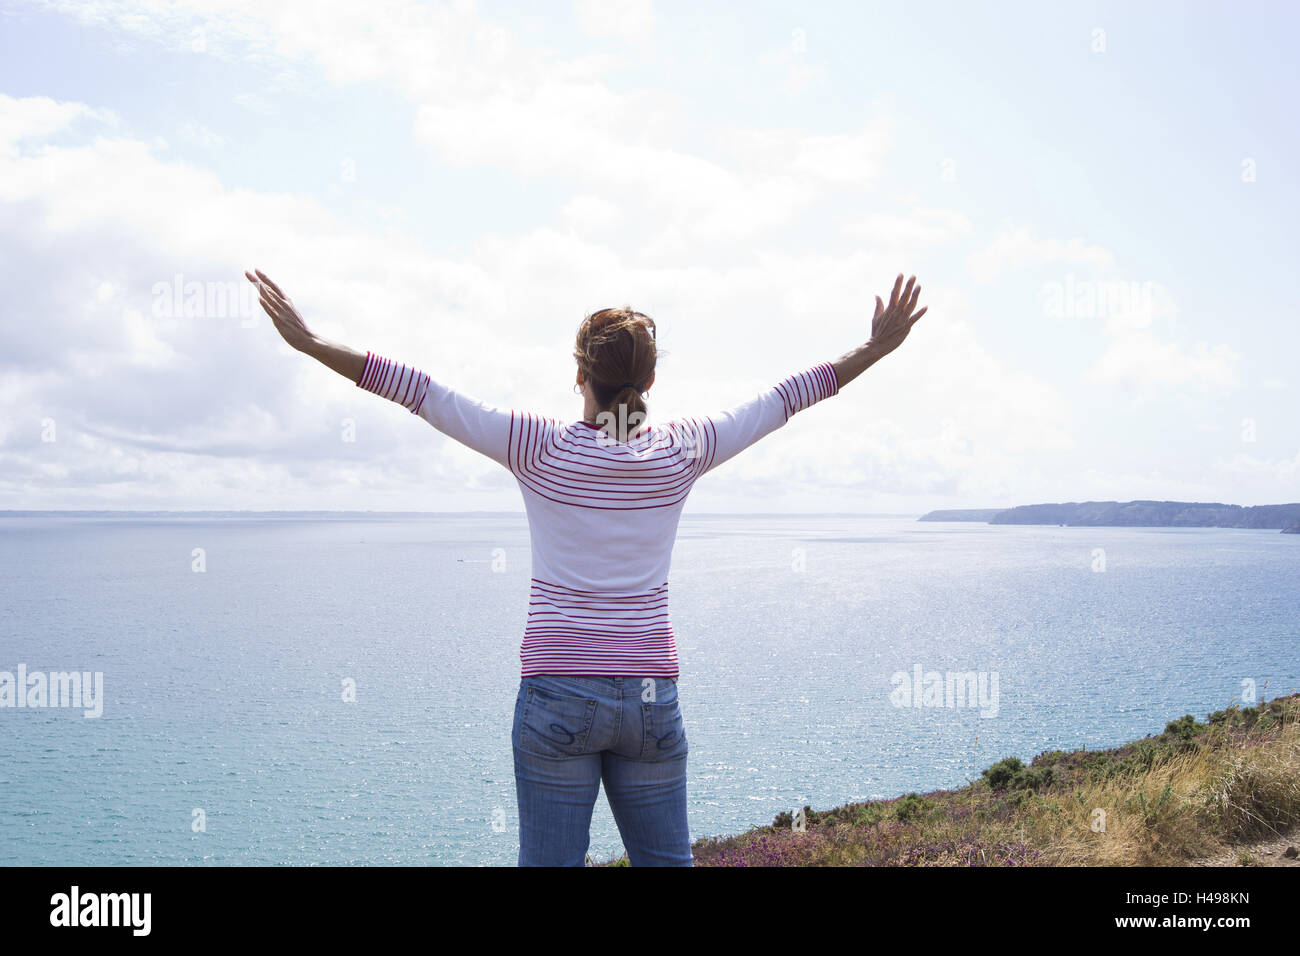 Woman, coast, view of the sea, arms spread, back view, Stock Photo